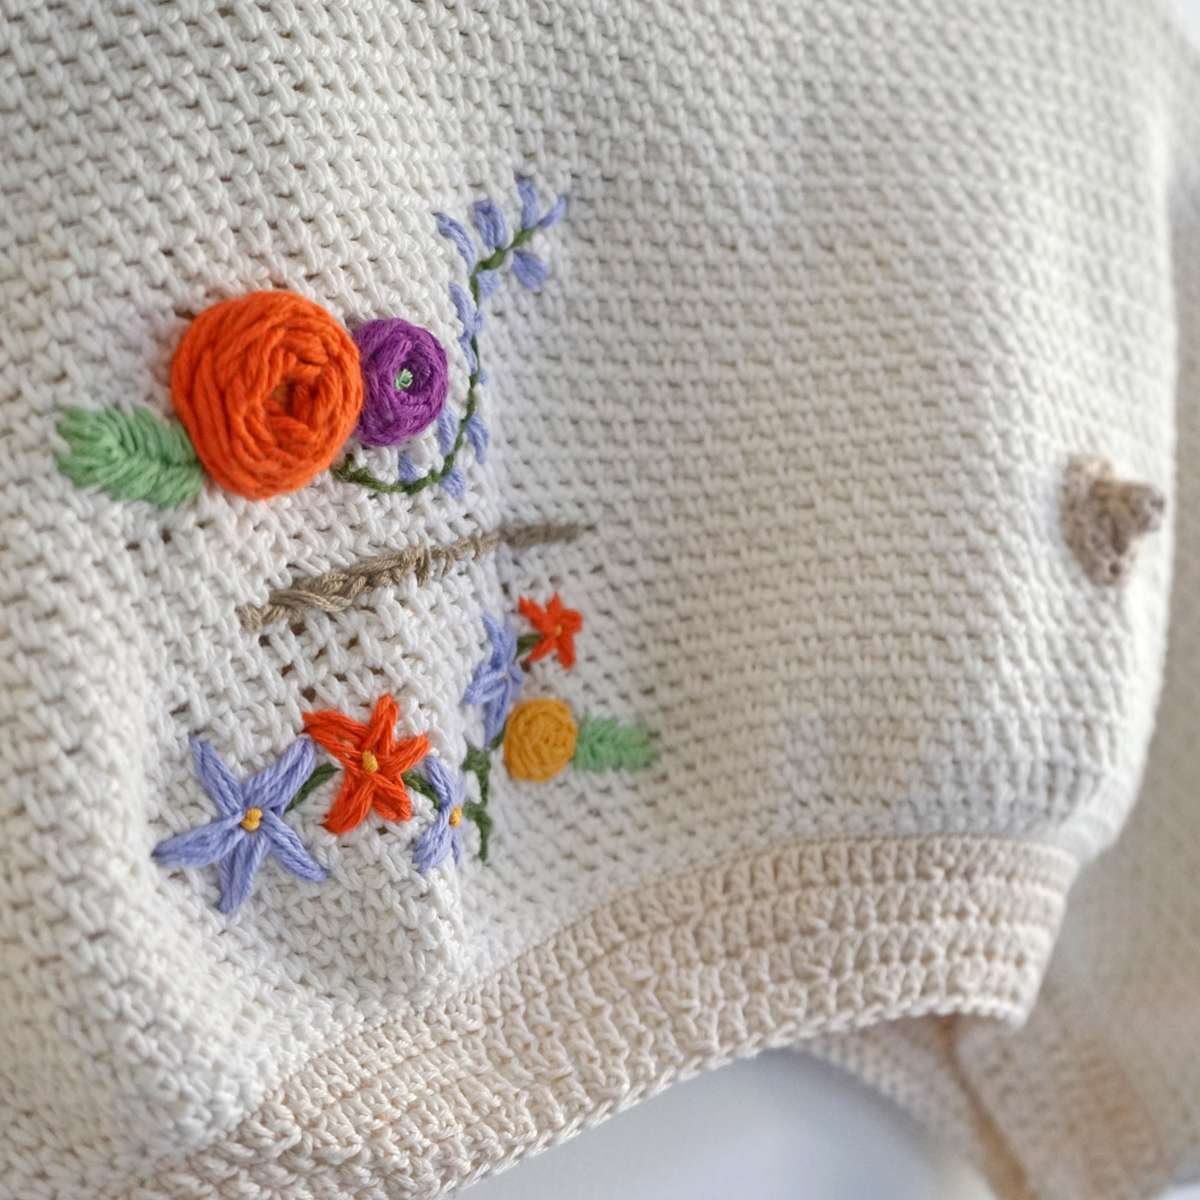 bloodimaryart-blog-blooming-resilience-breast-cancer-embroidery-details.jpeg